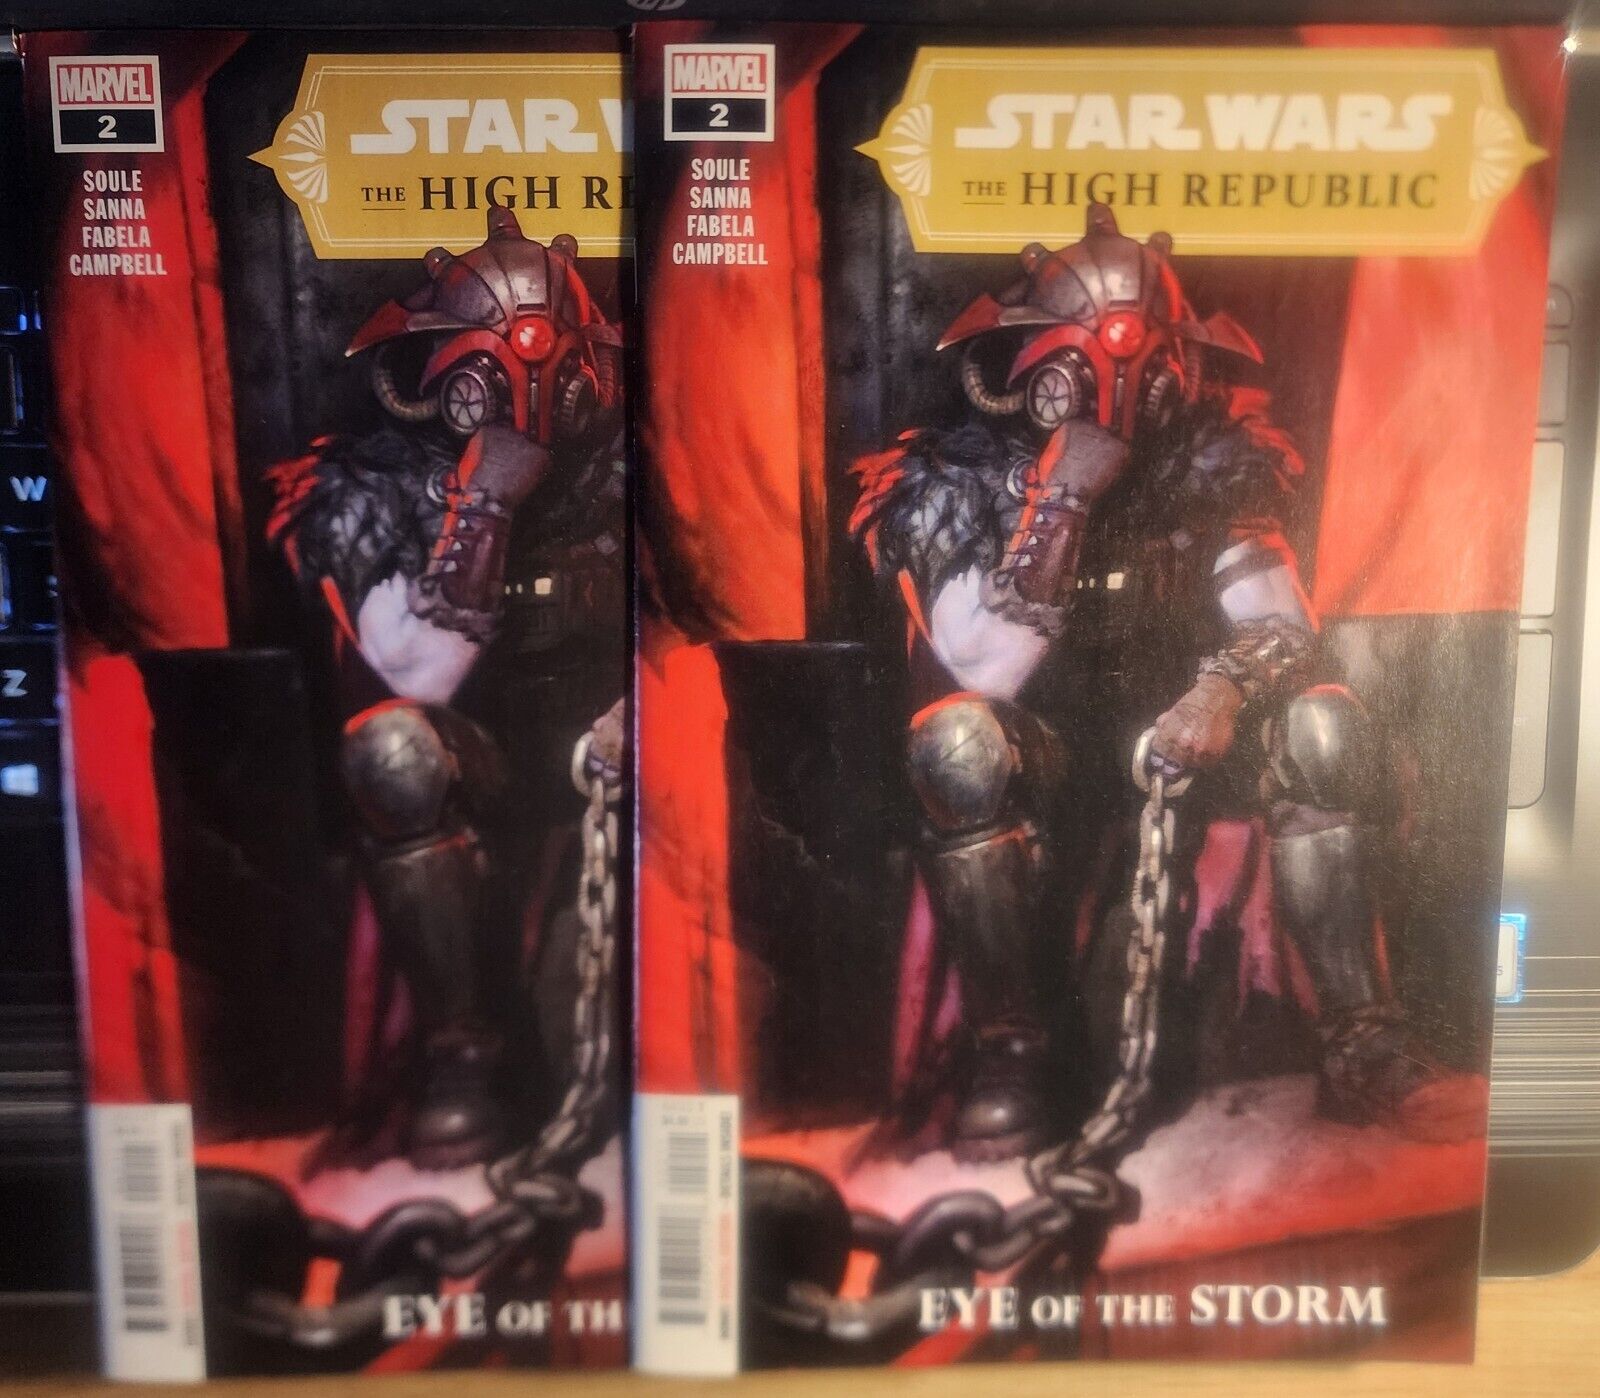 Star Wars The High Republic 2 Eye of the Storm x2